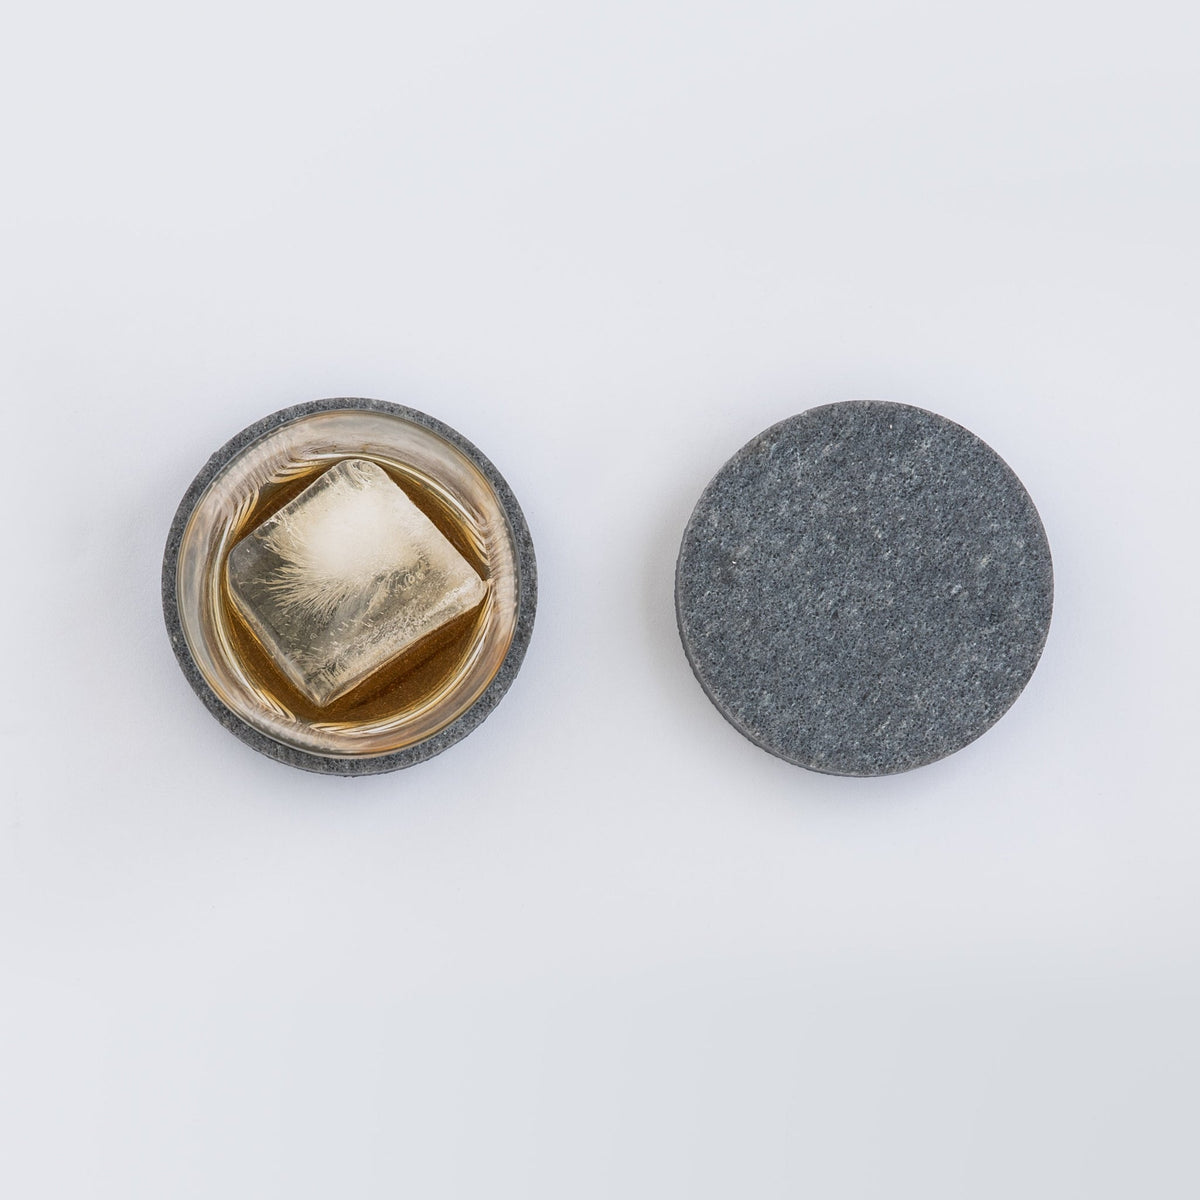 Round thick coaster in Caesarstone 4033 Rugged Concrete. Shown with whiskey glass and large ice cube.